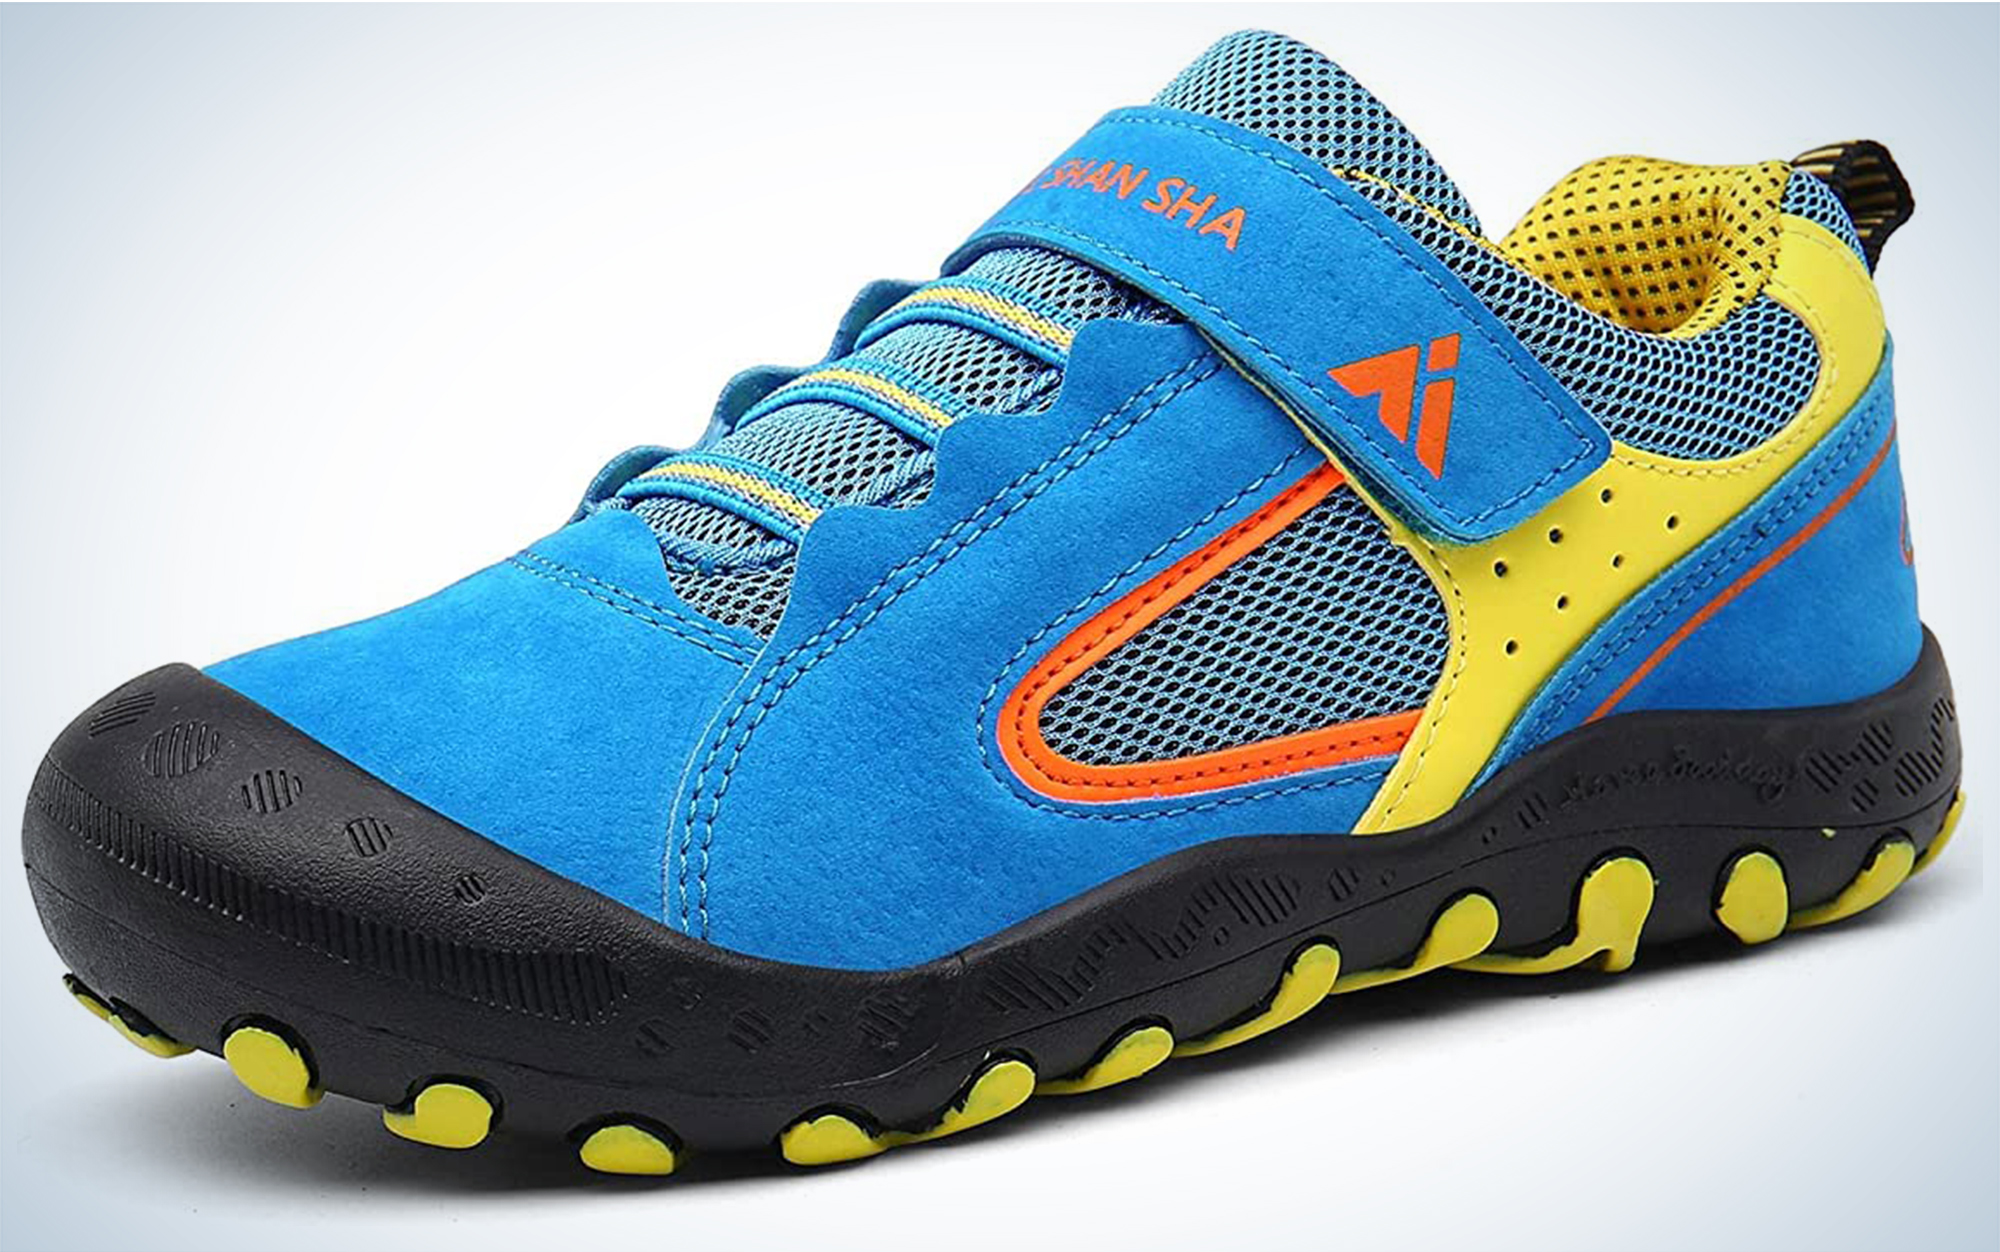 The Mishansha Kids Trekking and Hiking Shoes come in the best variety of colors.